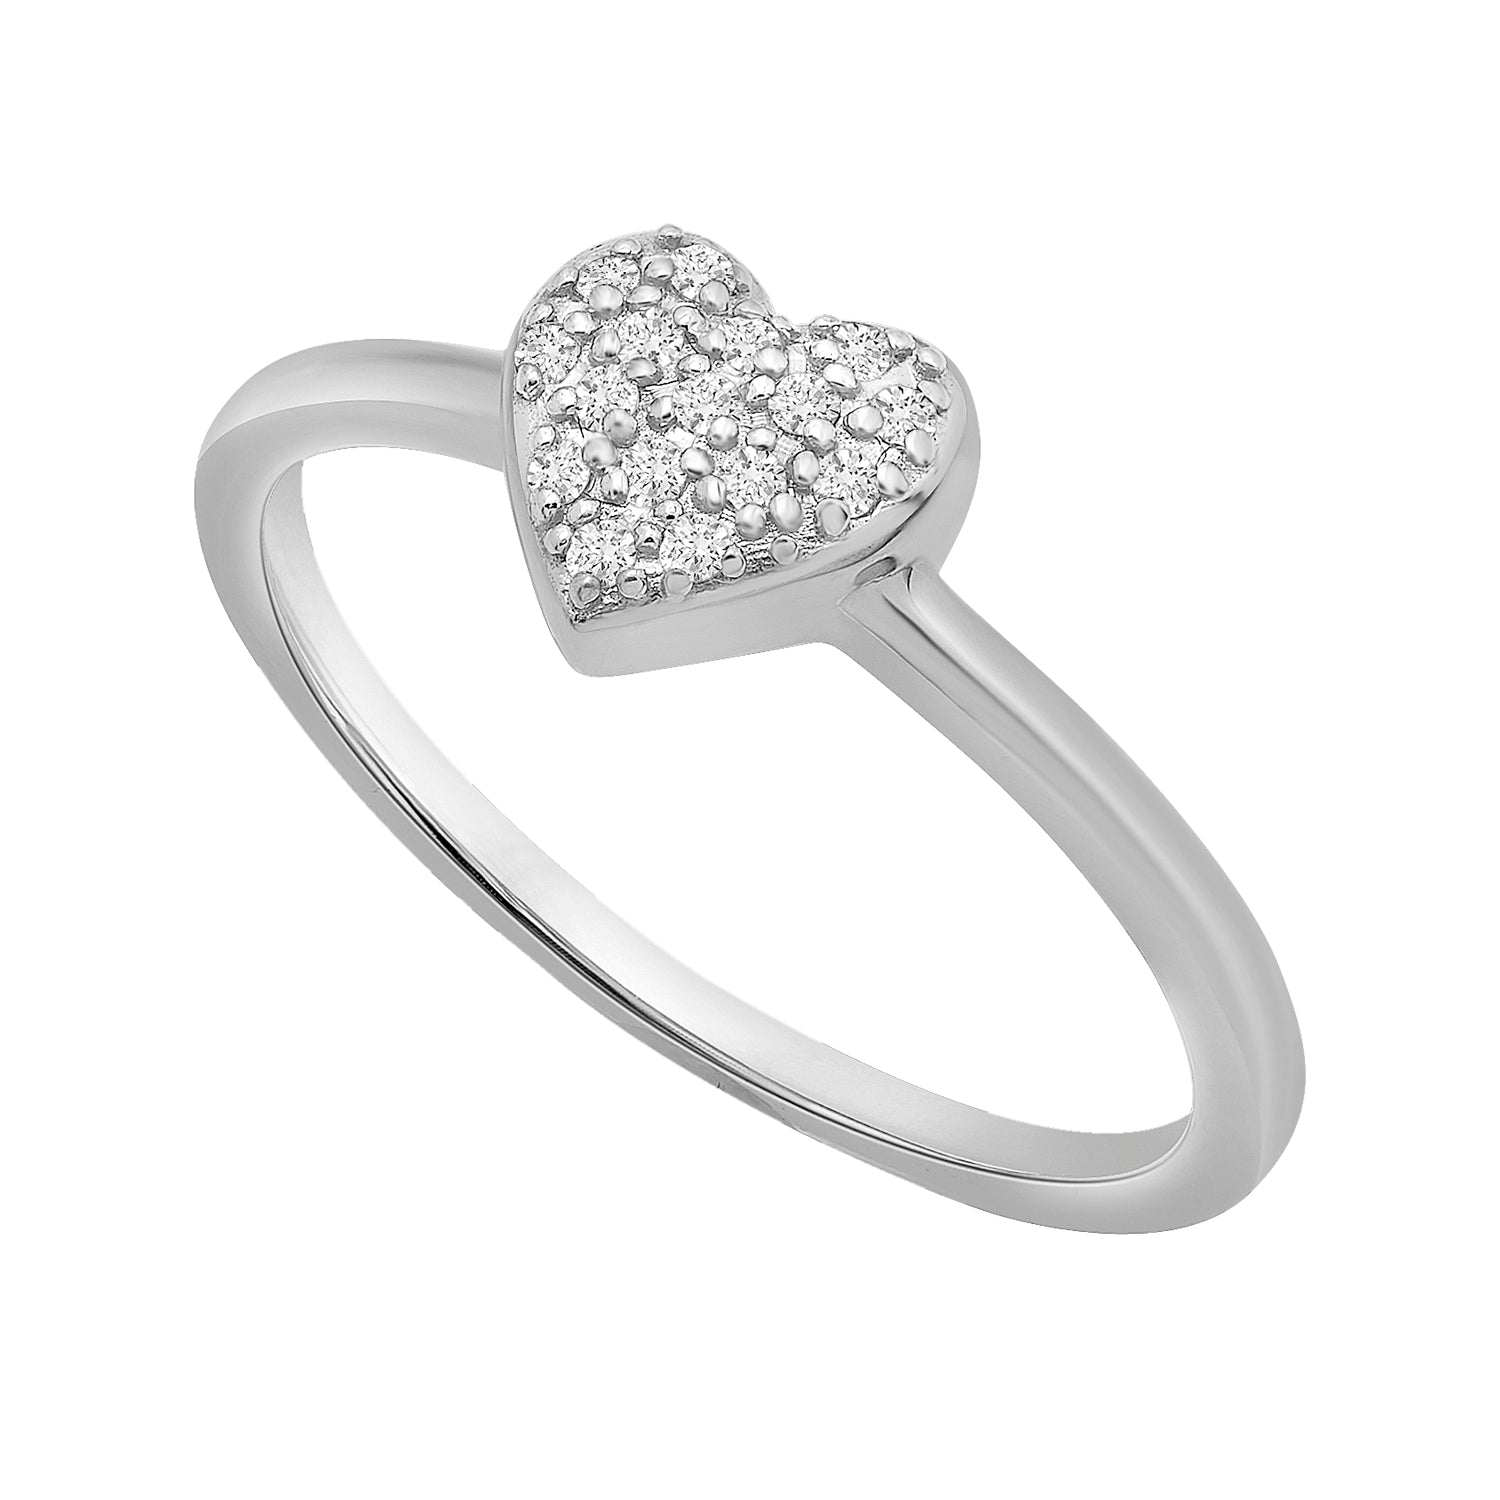 Mia Diamond Heart Ring In Silver From Top View